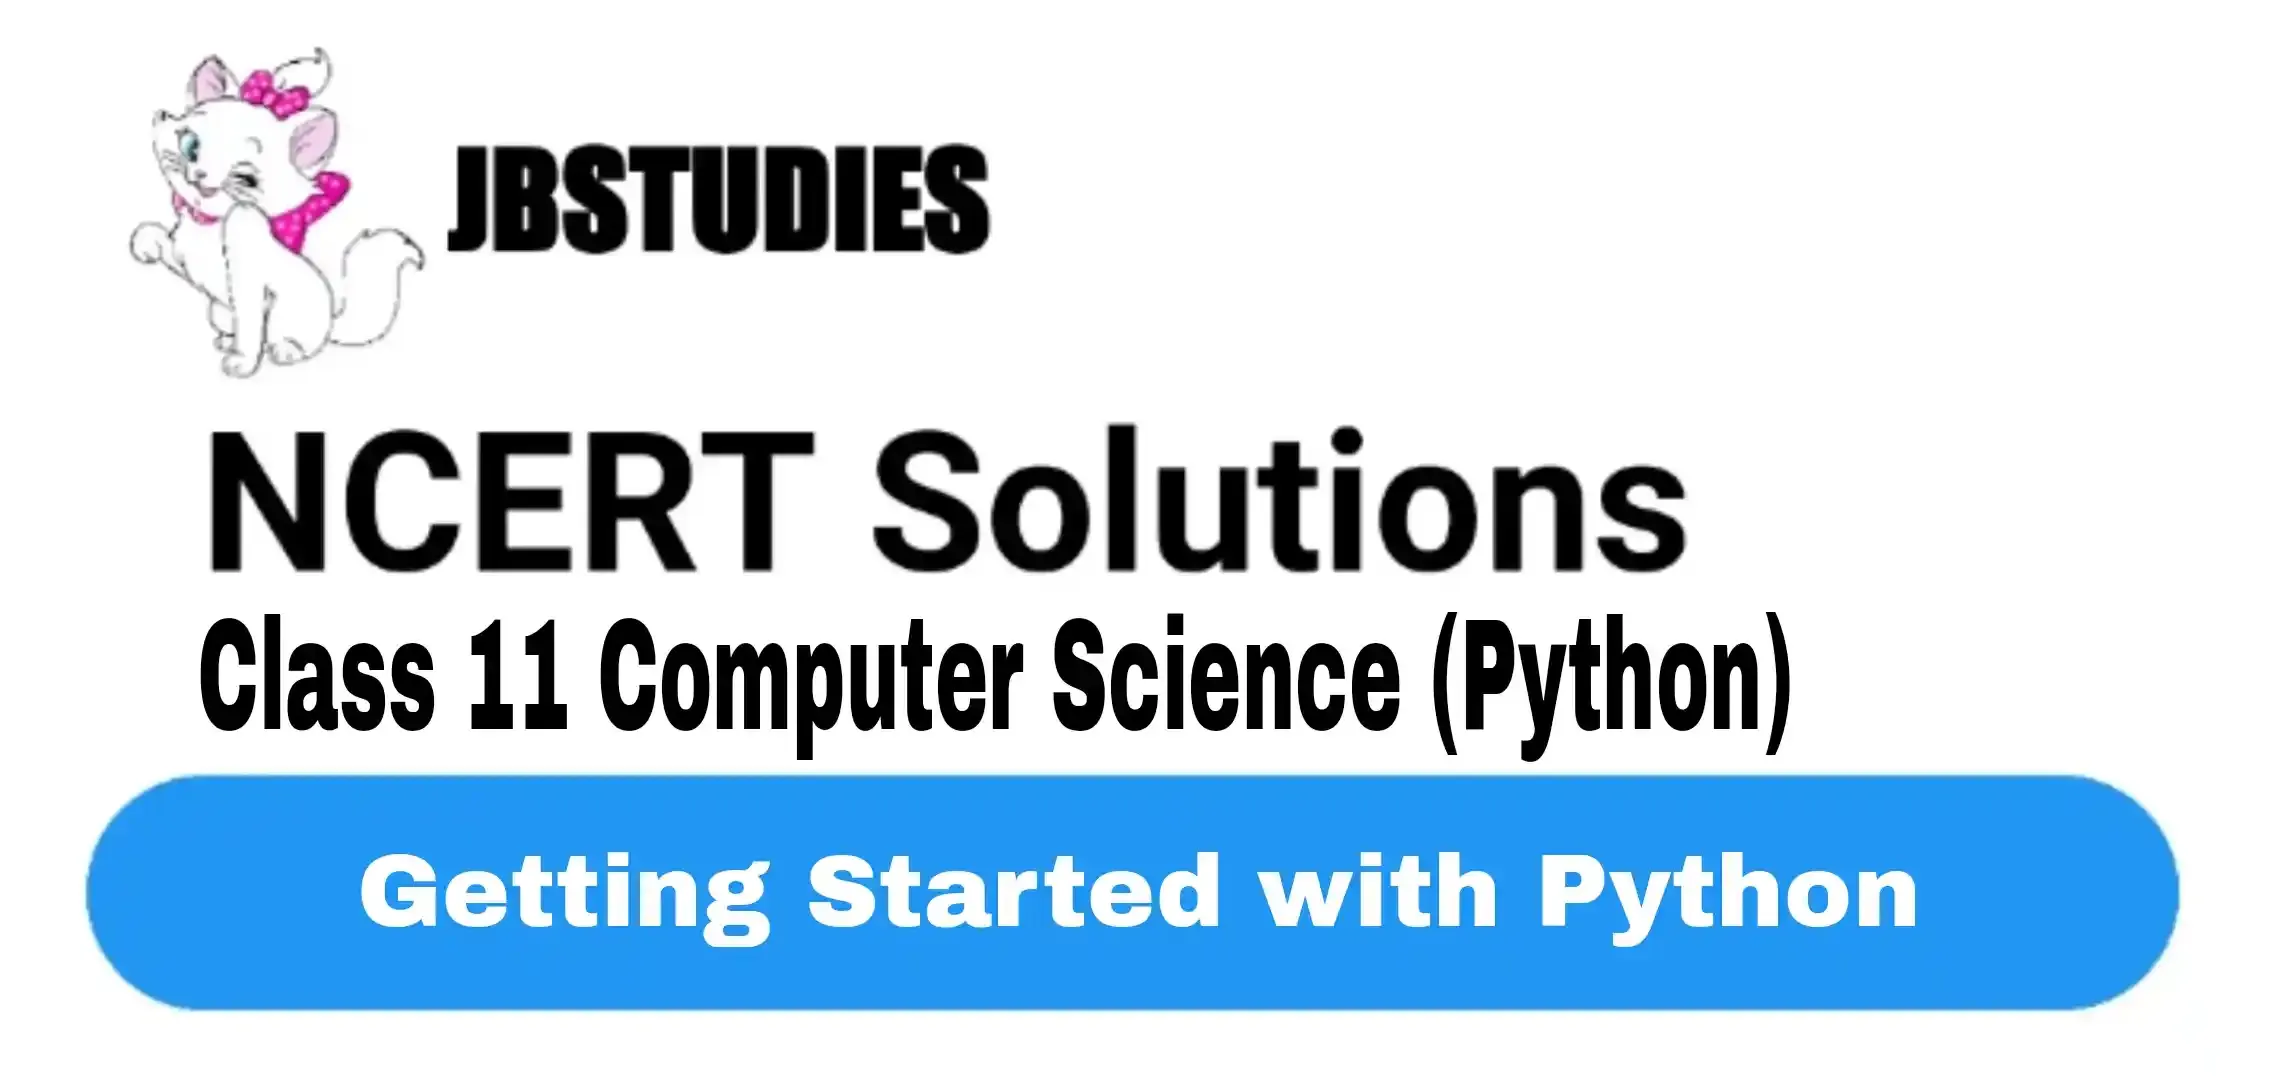 Solutions Class 11 Computer Science (Python) Chapter-8 (Getting Started with Python)